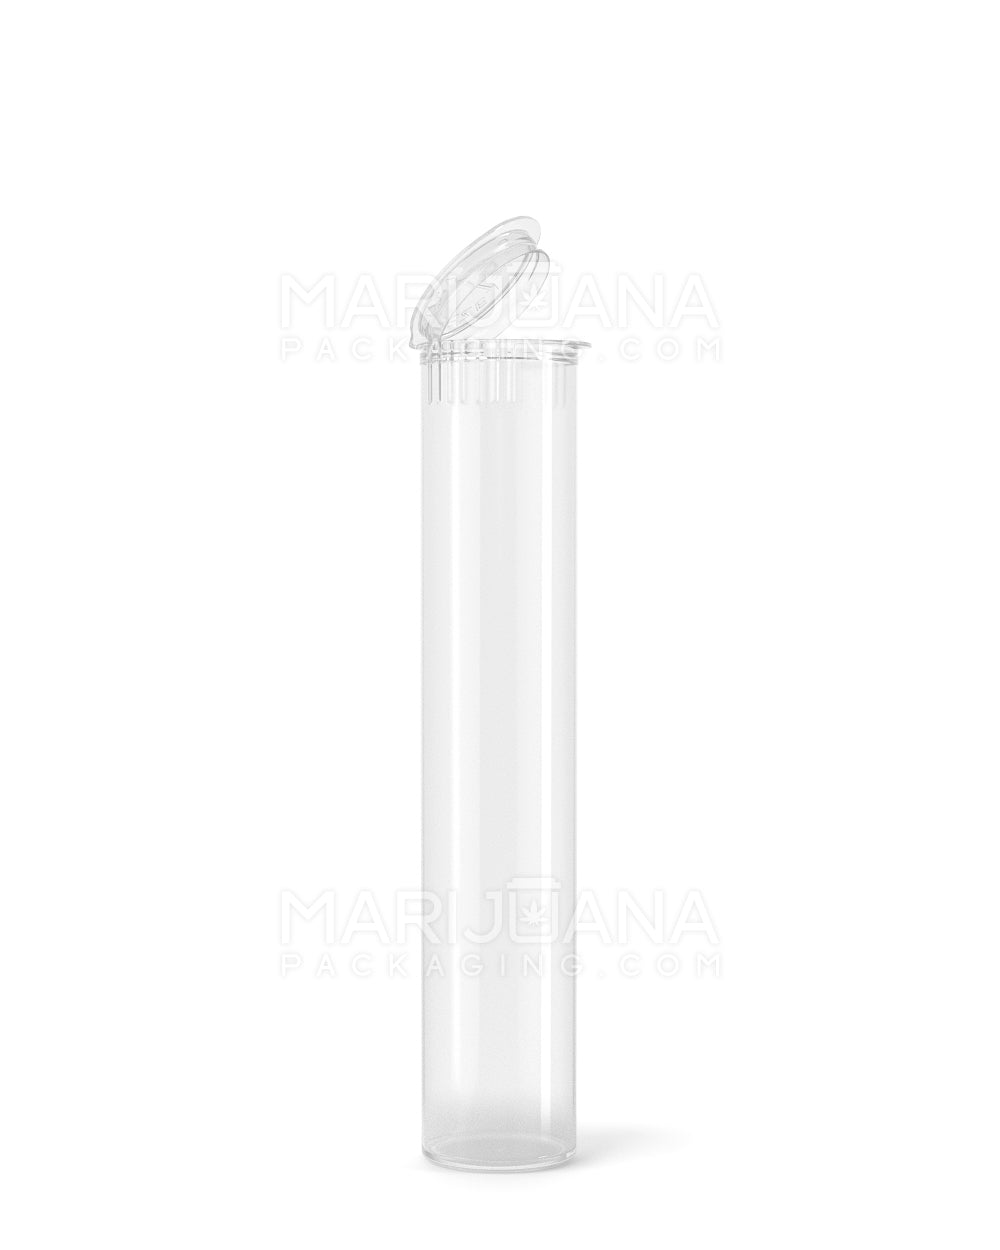 Child Resistant | 100% Biodegradable Pop Top Plastic Pre-Roll Tubes | 98mm - Clear - 1000 Count - 1